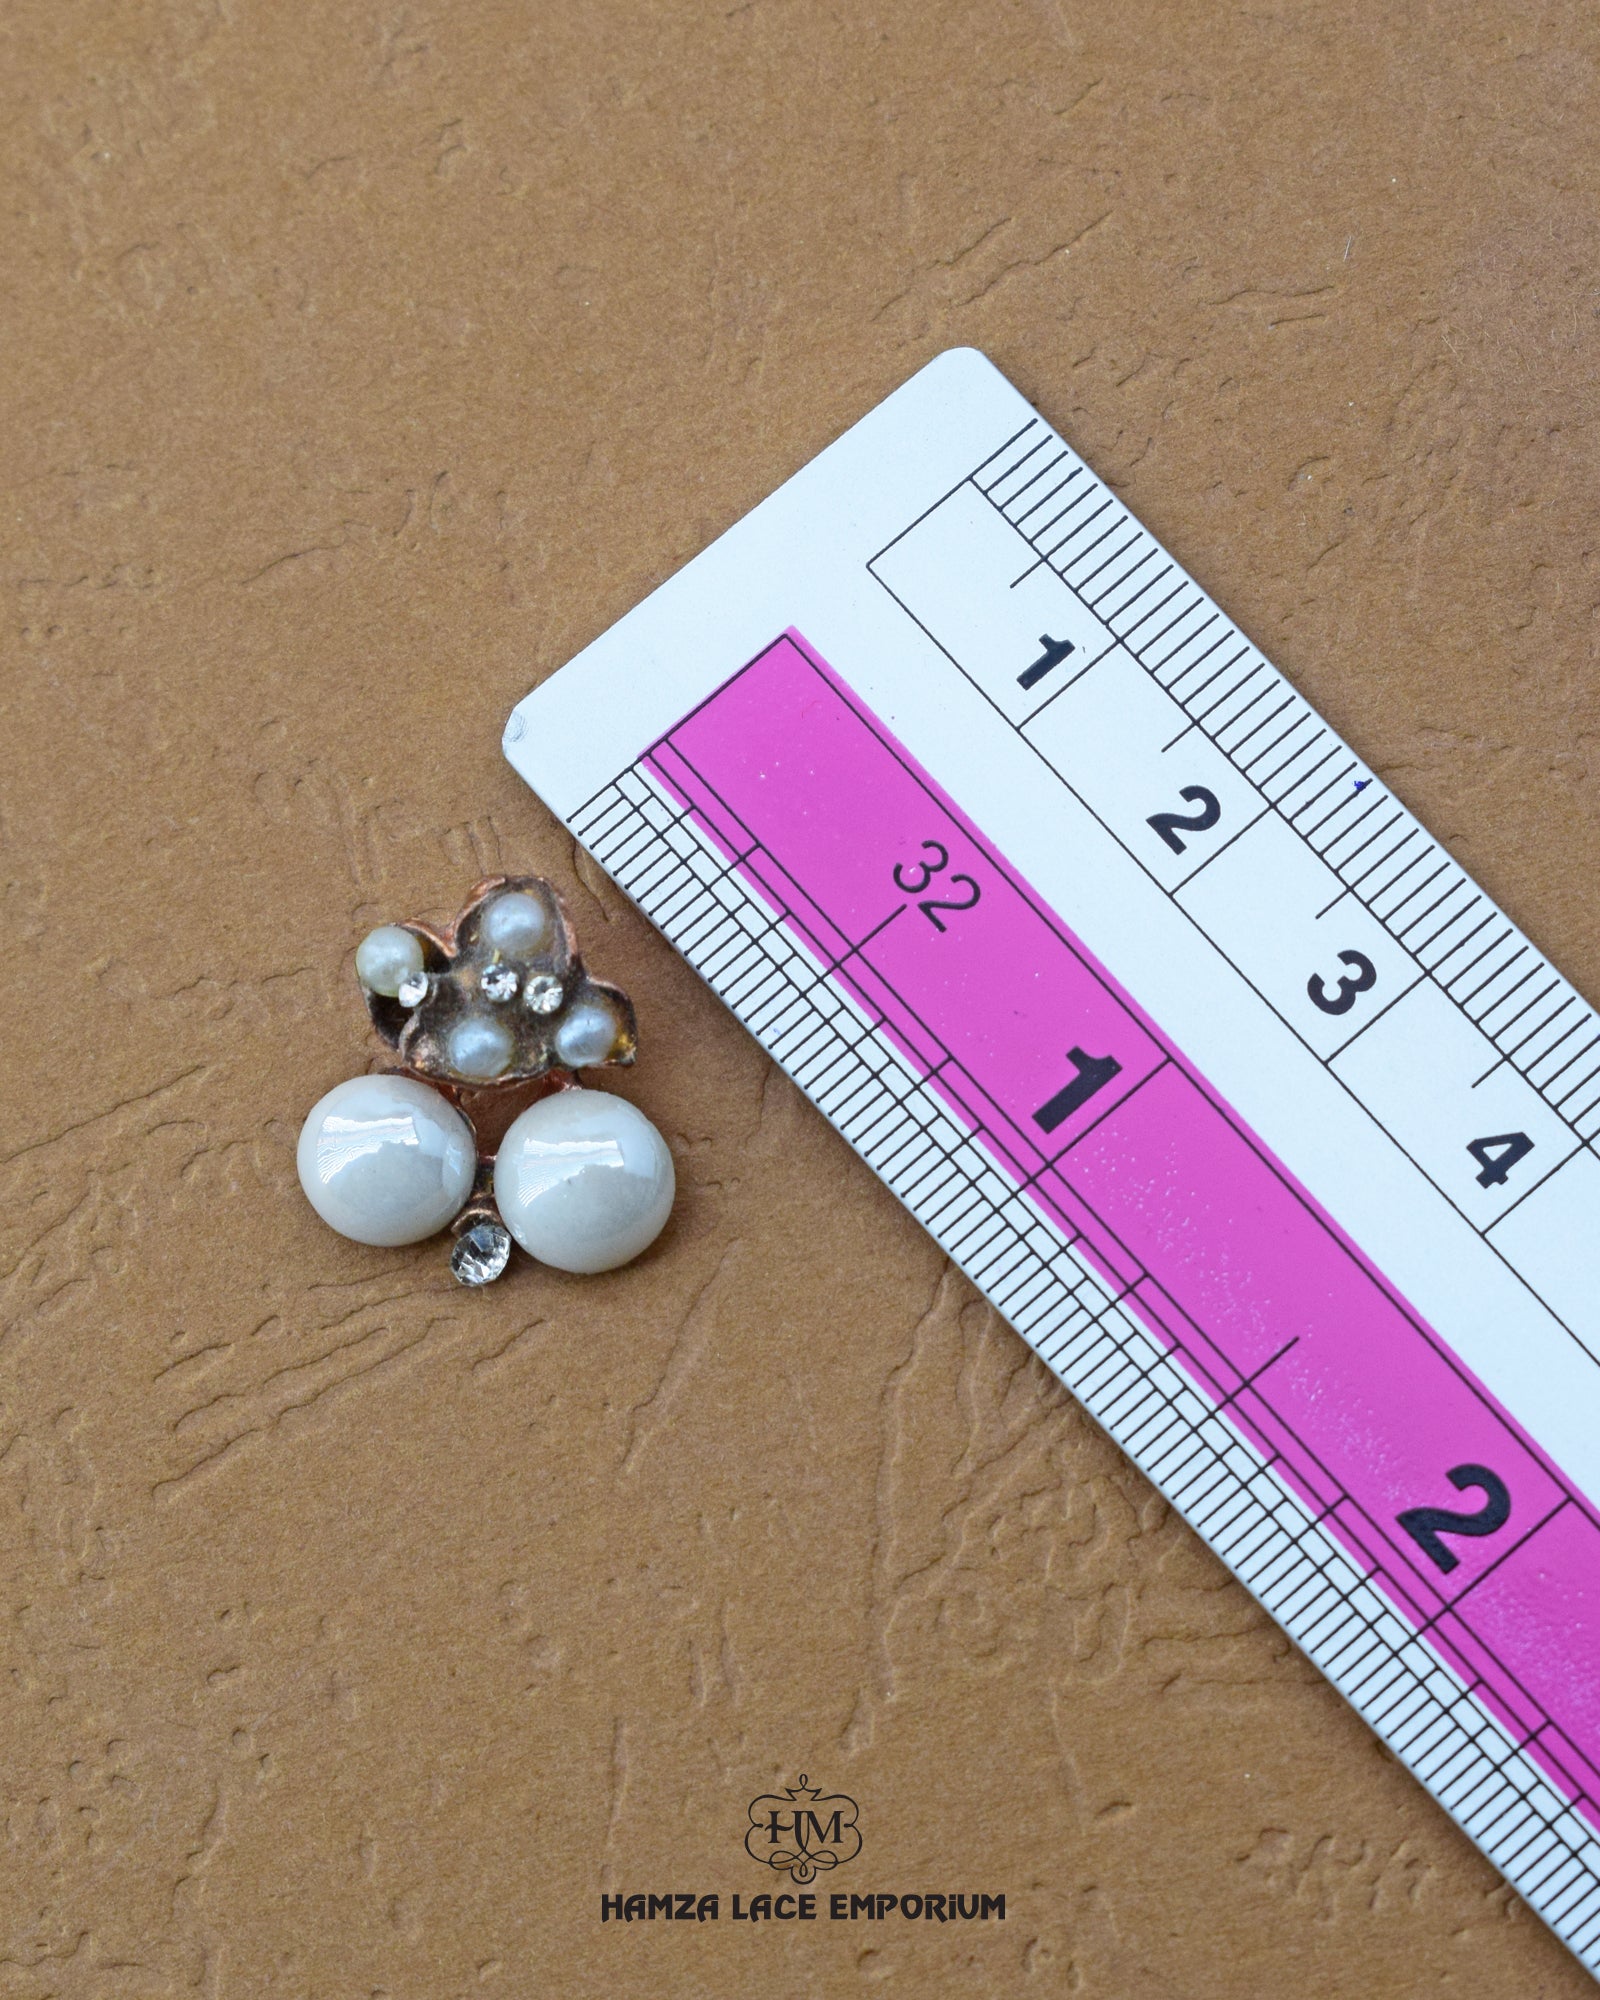 'Fancy Button FB029' with ruler for size reference in the product image.